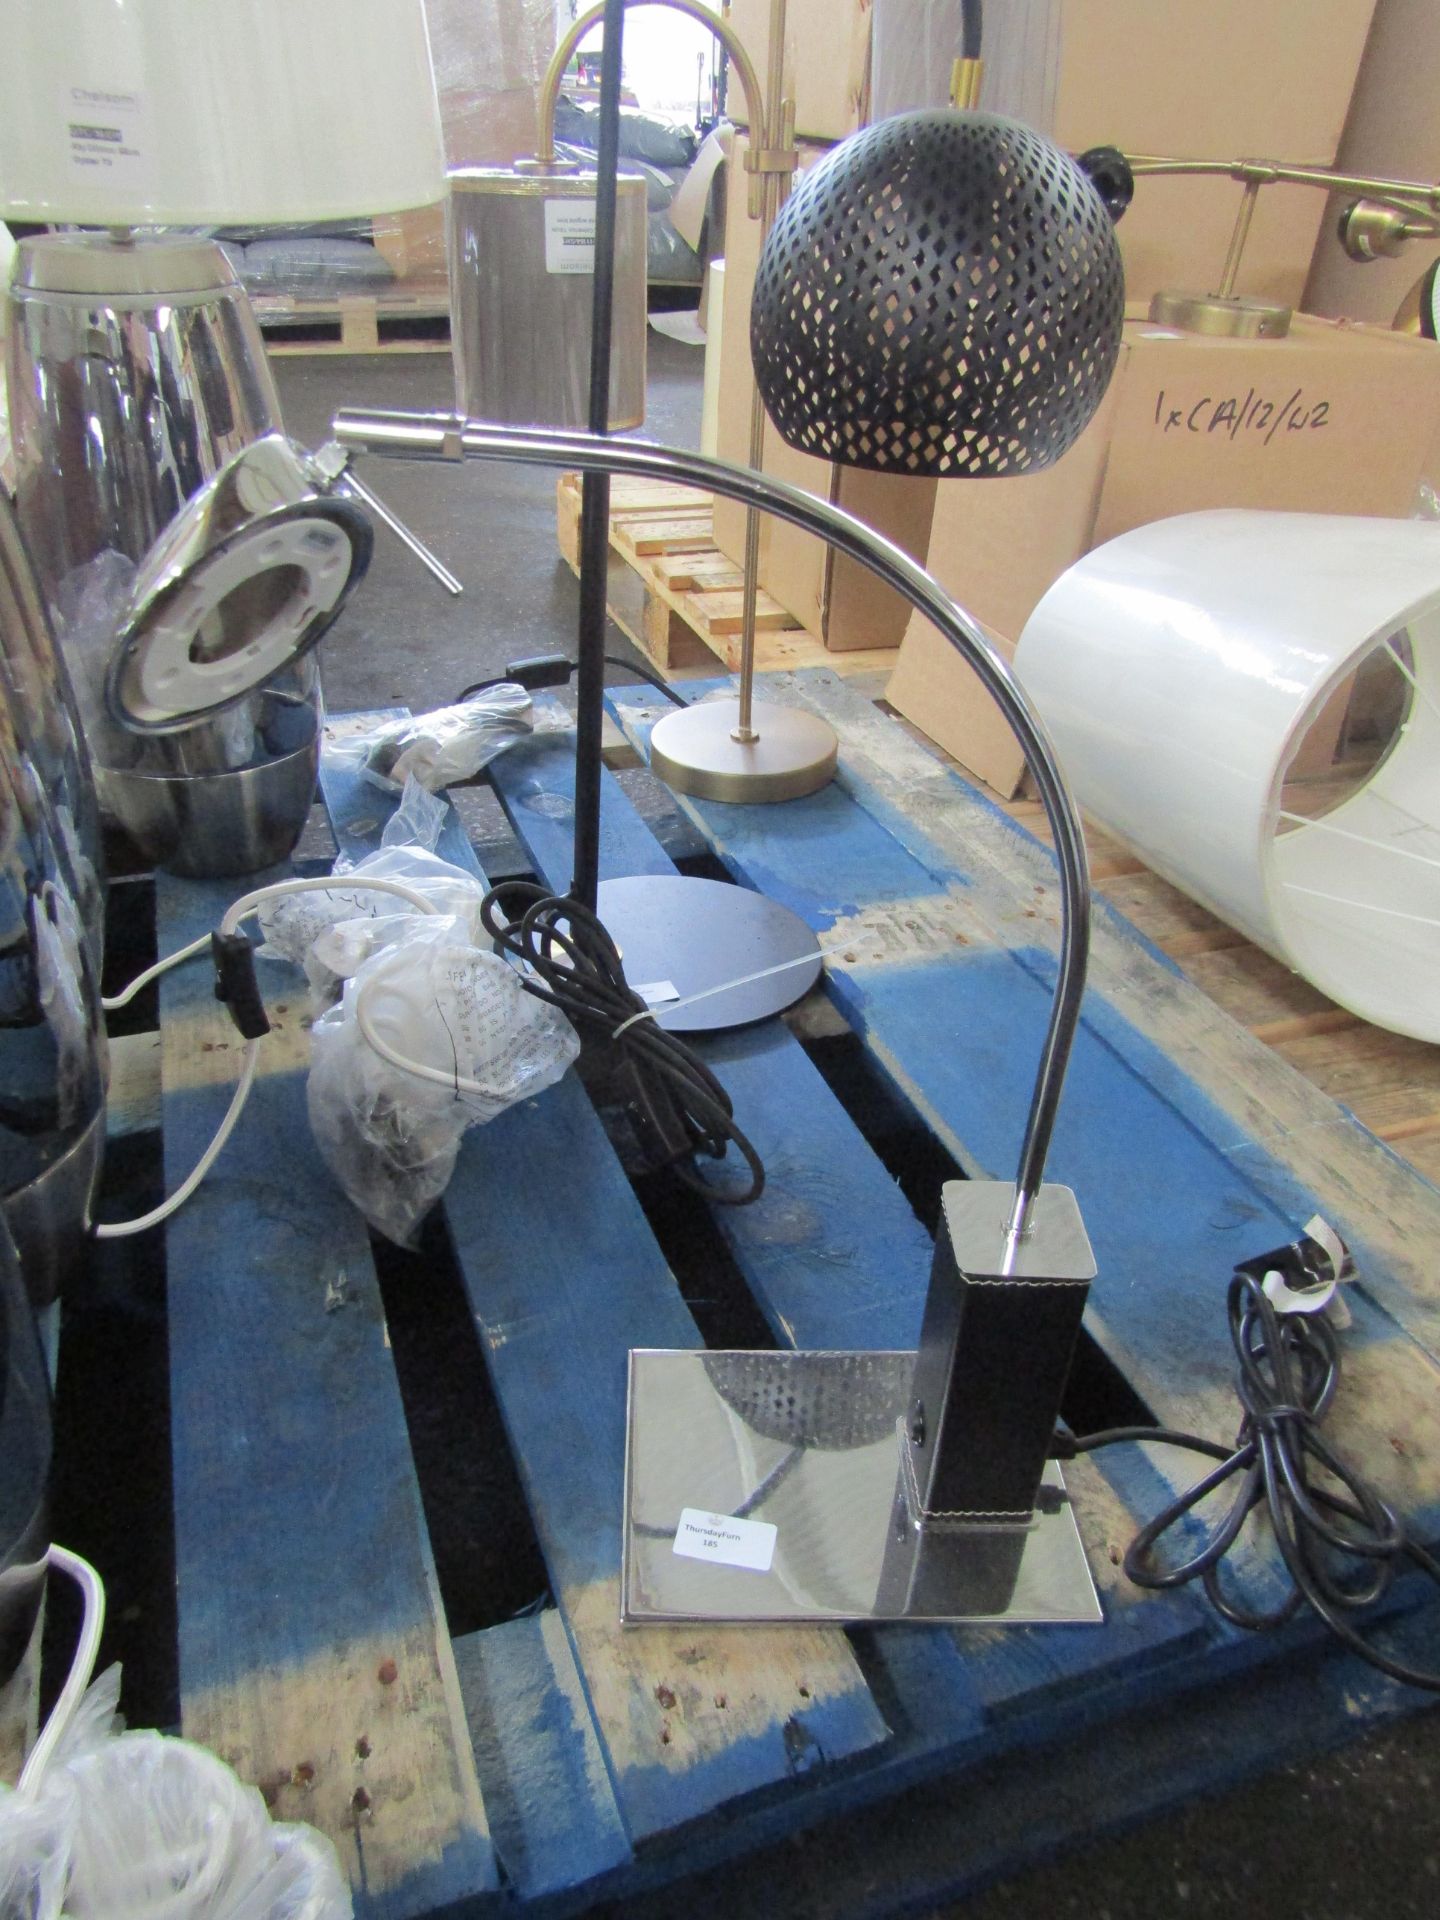 Chelsom - Chrome LED Table Lamp - See Image For Design - Good Condition.